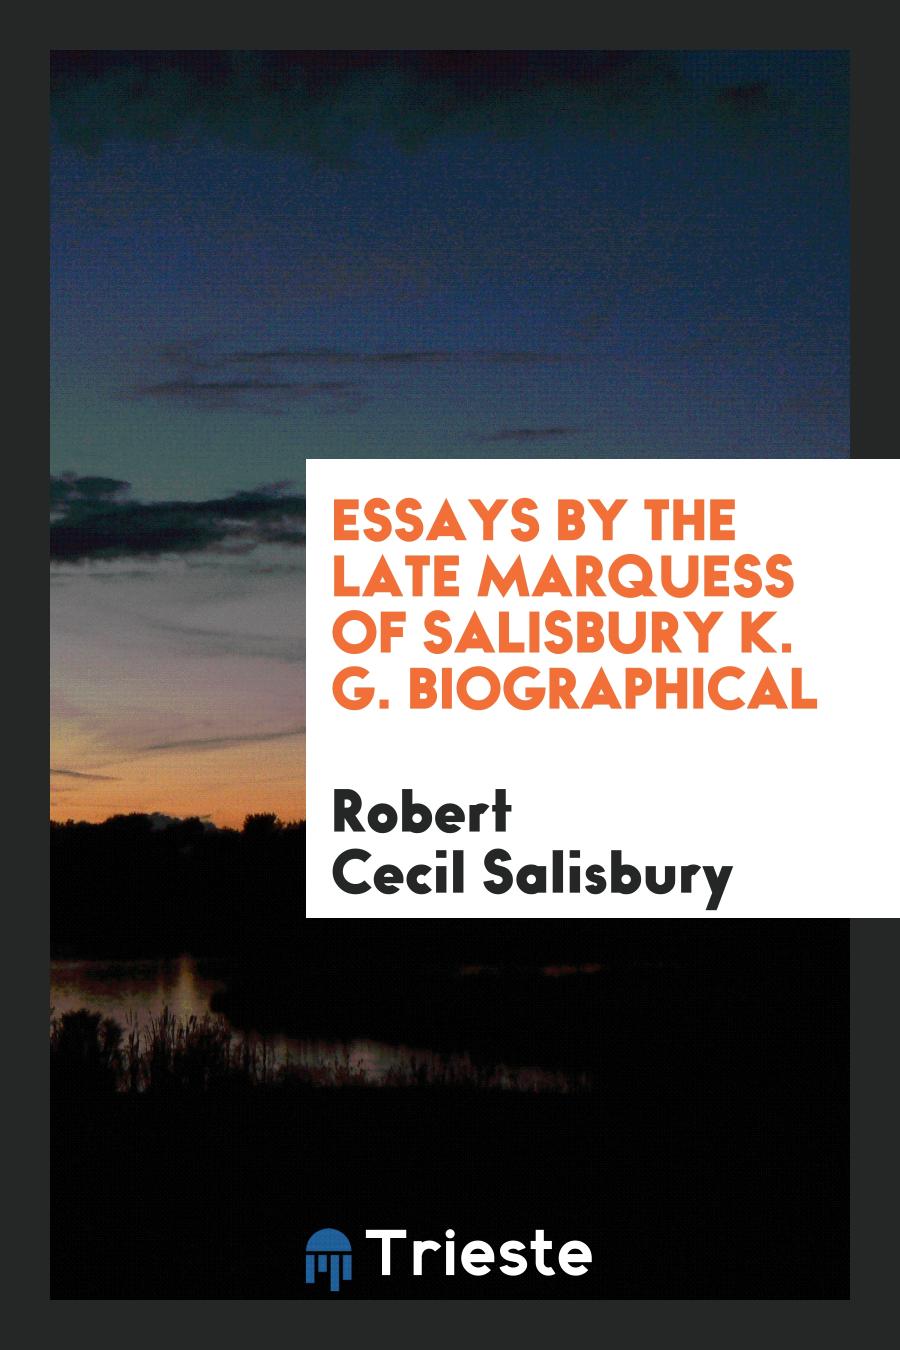 Essays by the Late Marquess of Salisbury K. G. Biographical